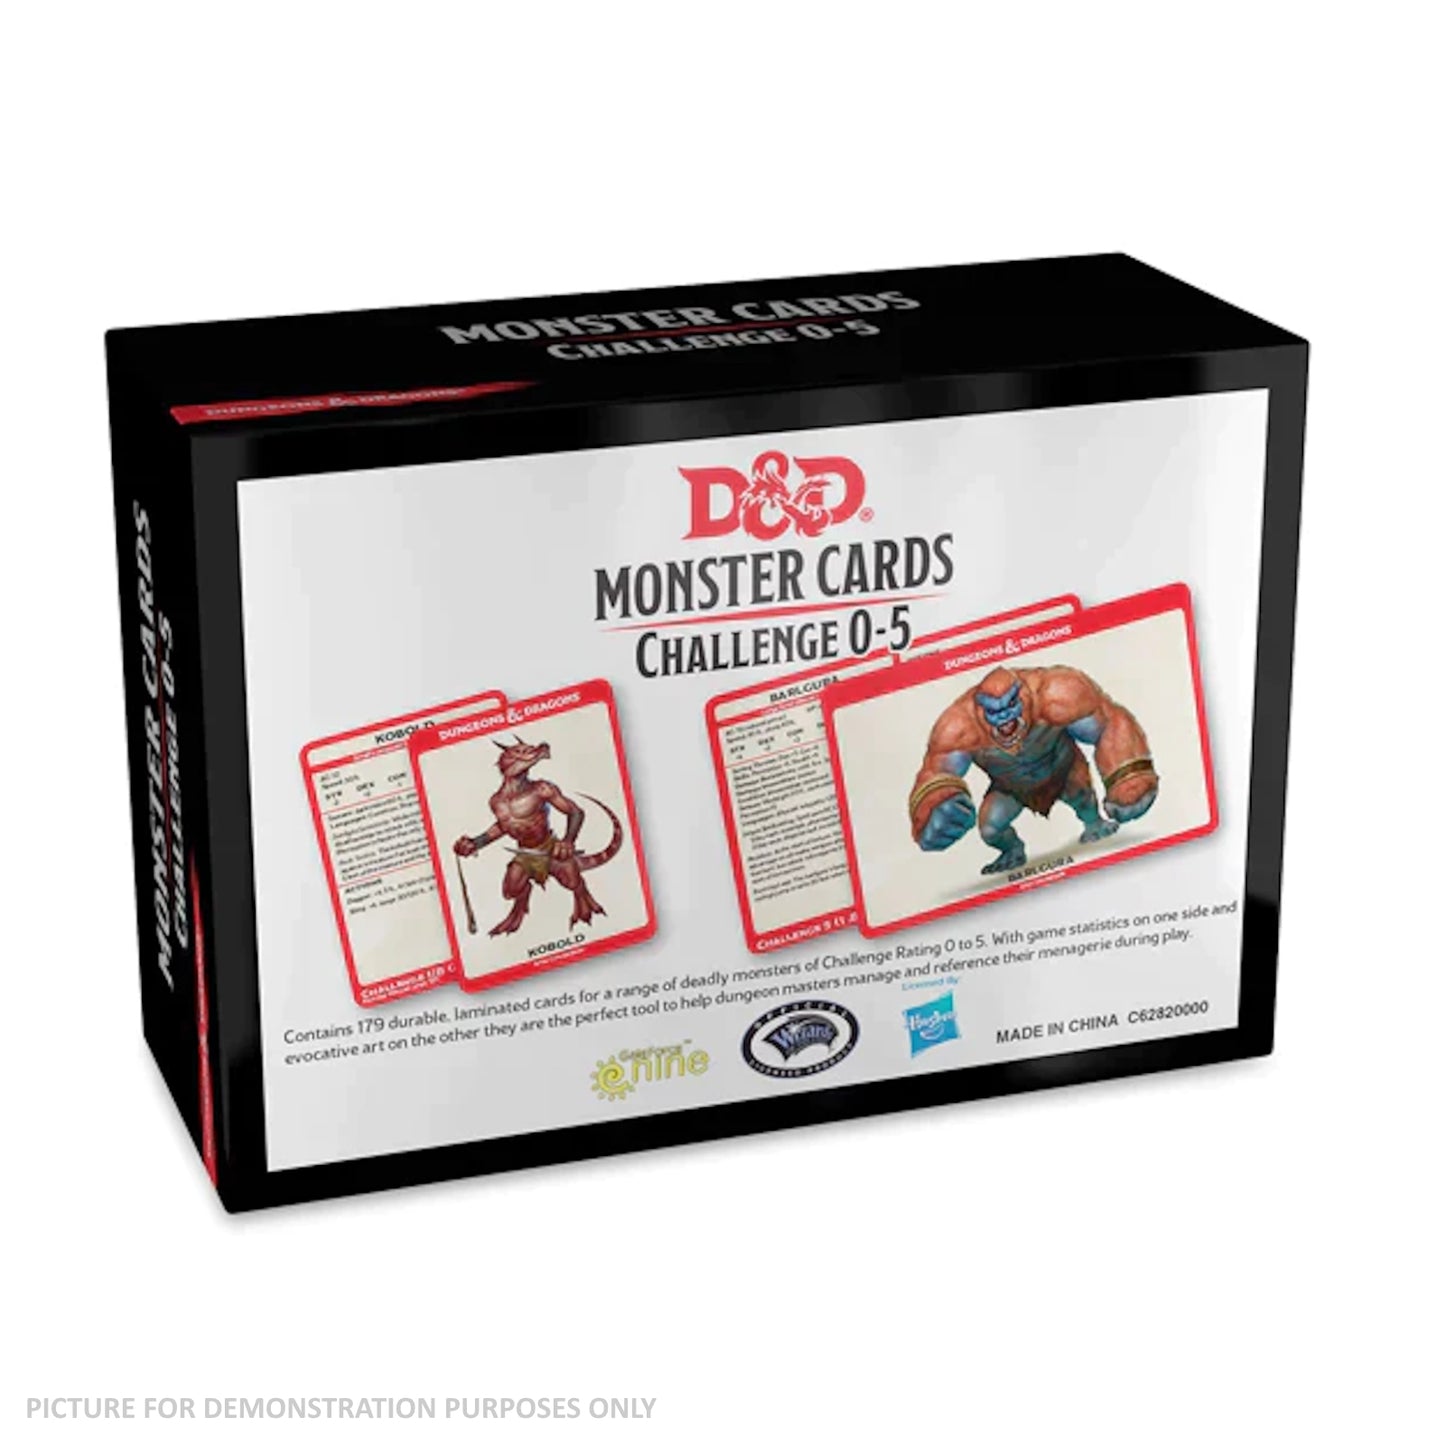 Dungeons & Dragons Monster Cards Challenge Deck 0-5